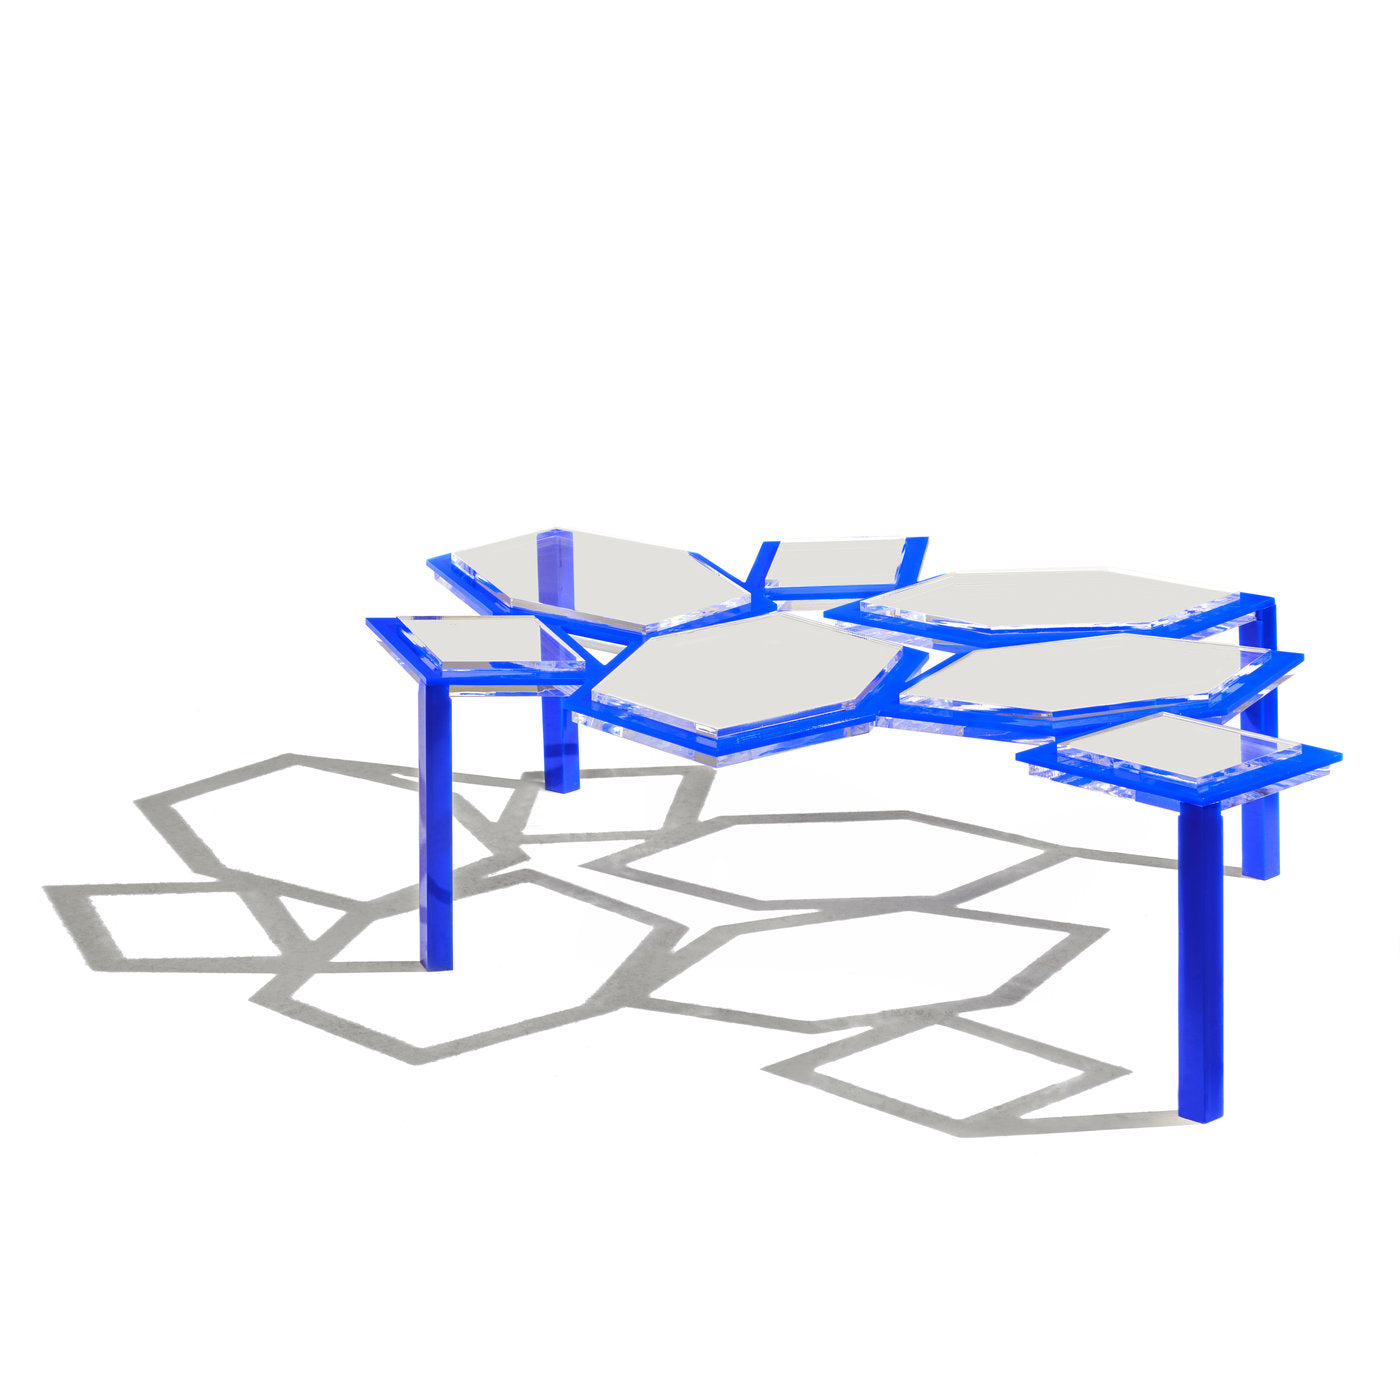 Penrose Large Blue Coffee Table #2 - Alternative view 1